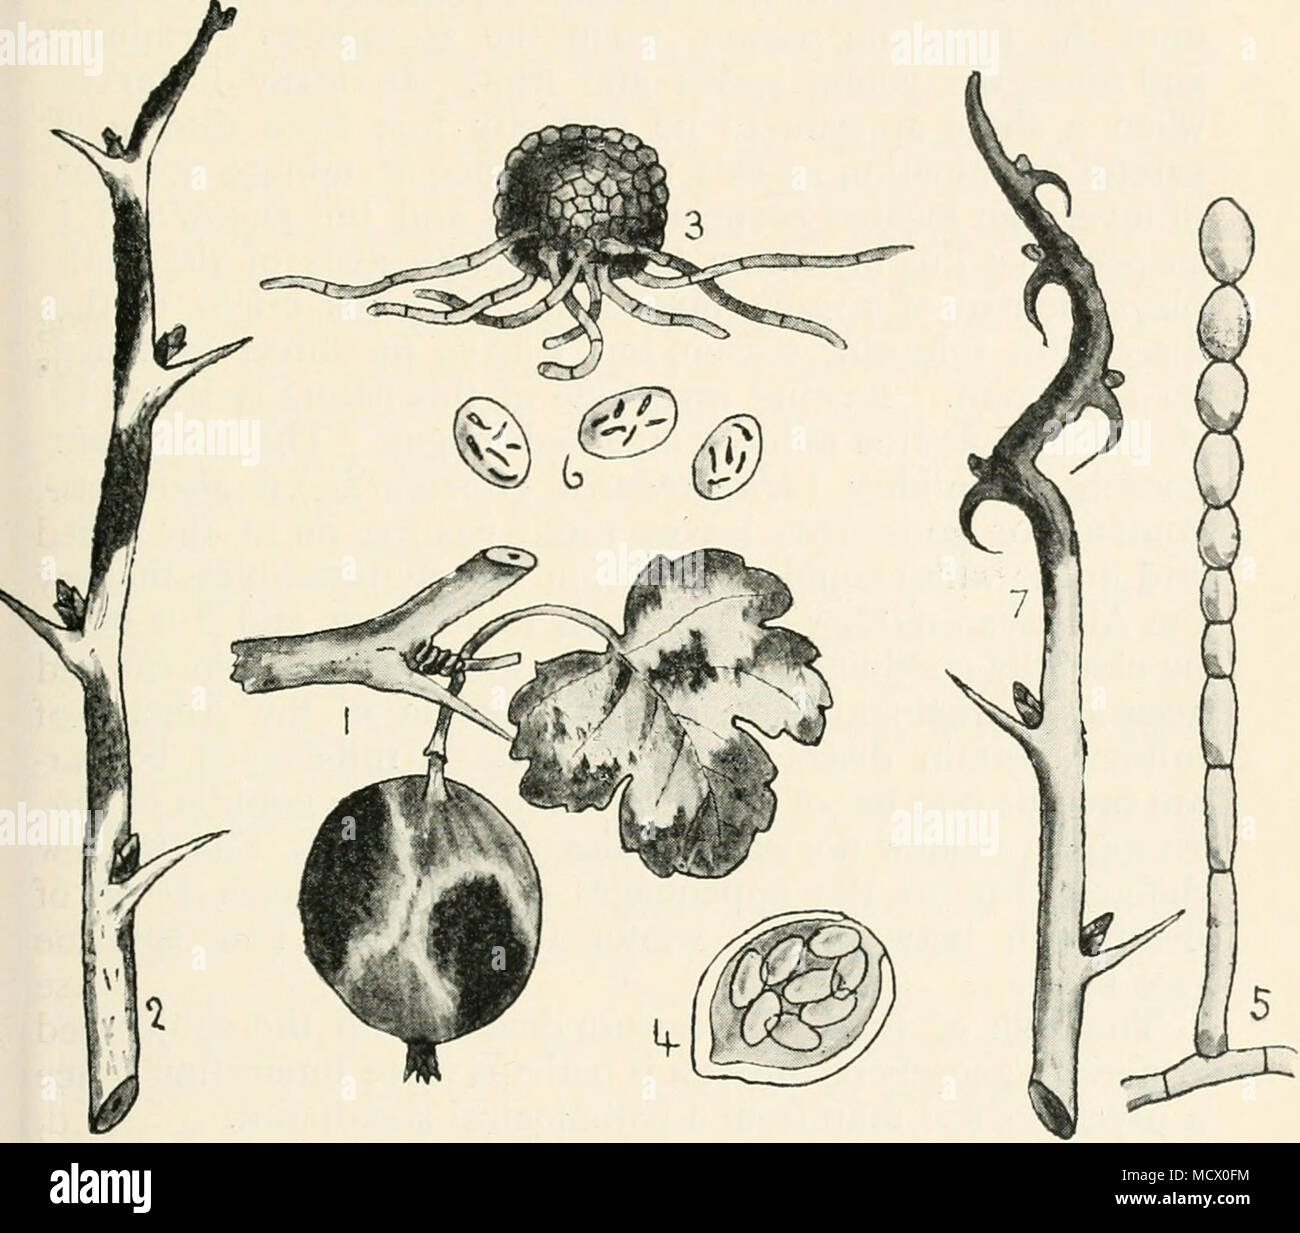 . Fig. 37.—Sphaerotheca mors-uvae. 1, showing mildew on leaf and fruit ; 2, winter stage on a shoot ; 3, perithecium or winter fruit; 4, ascus con- taining spores ; 5, a chain of conidia or summer fruit ; 6, conidia showing fibrosin bodies in their interior; 7, a branch that has been injured by aphides (green fly) at the tip. The recurved spines and brown colour are characteristic. Figs, i, 2, and 7, nat. size ; remainder highly mag. when an autumnal expansion of buds follows early pruning. As the season advances the white mildew, which at first resembles in general appearance the well-known h Stock Photo